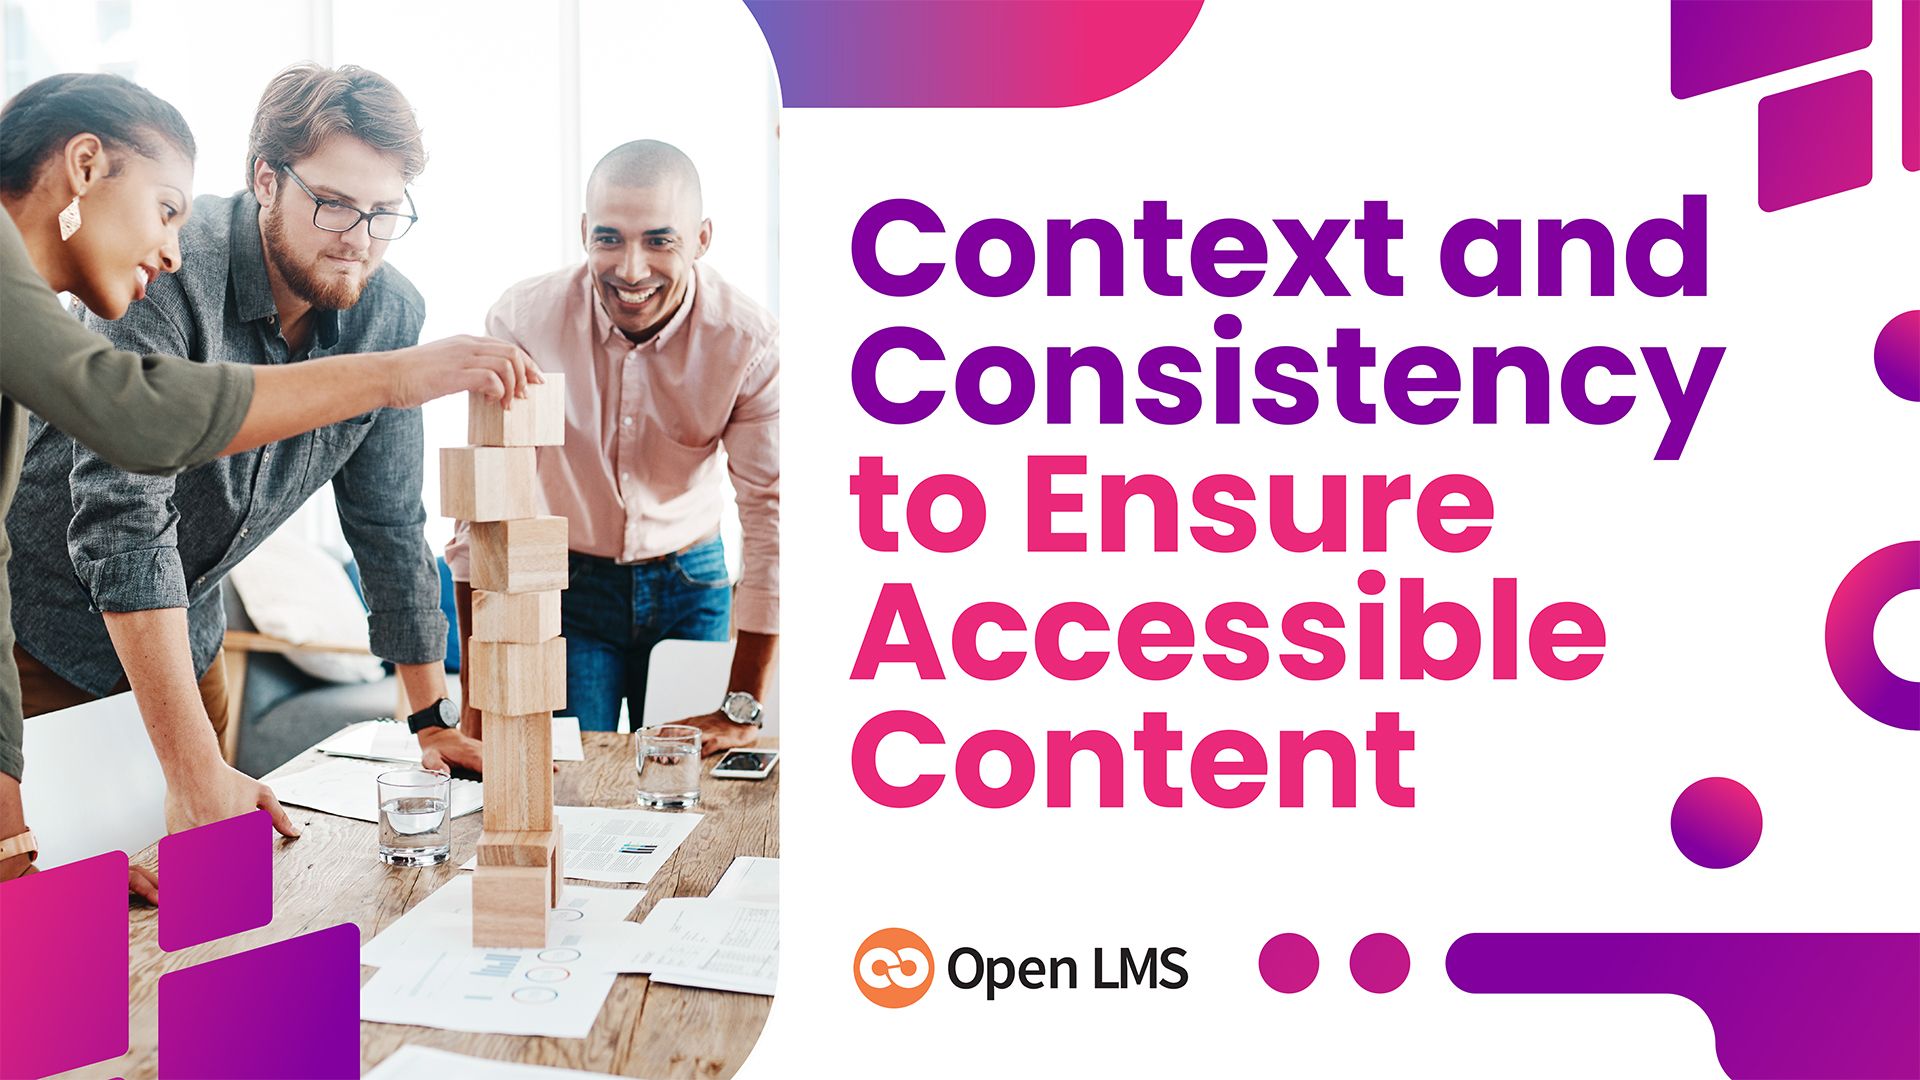 6 Ways of Using Context and Consistency to Ensure Your Online Learning Content Is Accessible